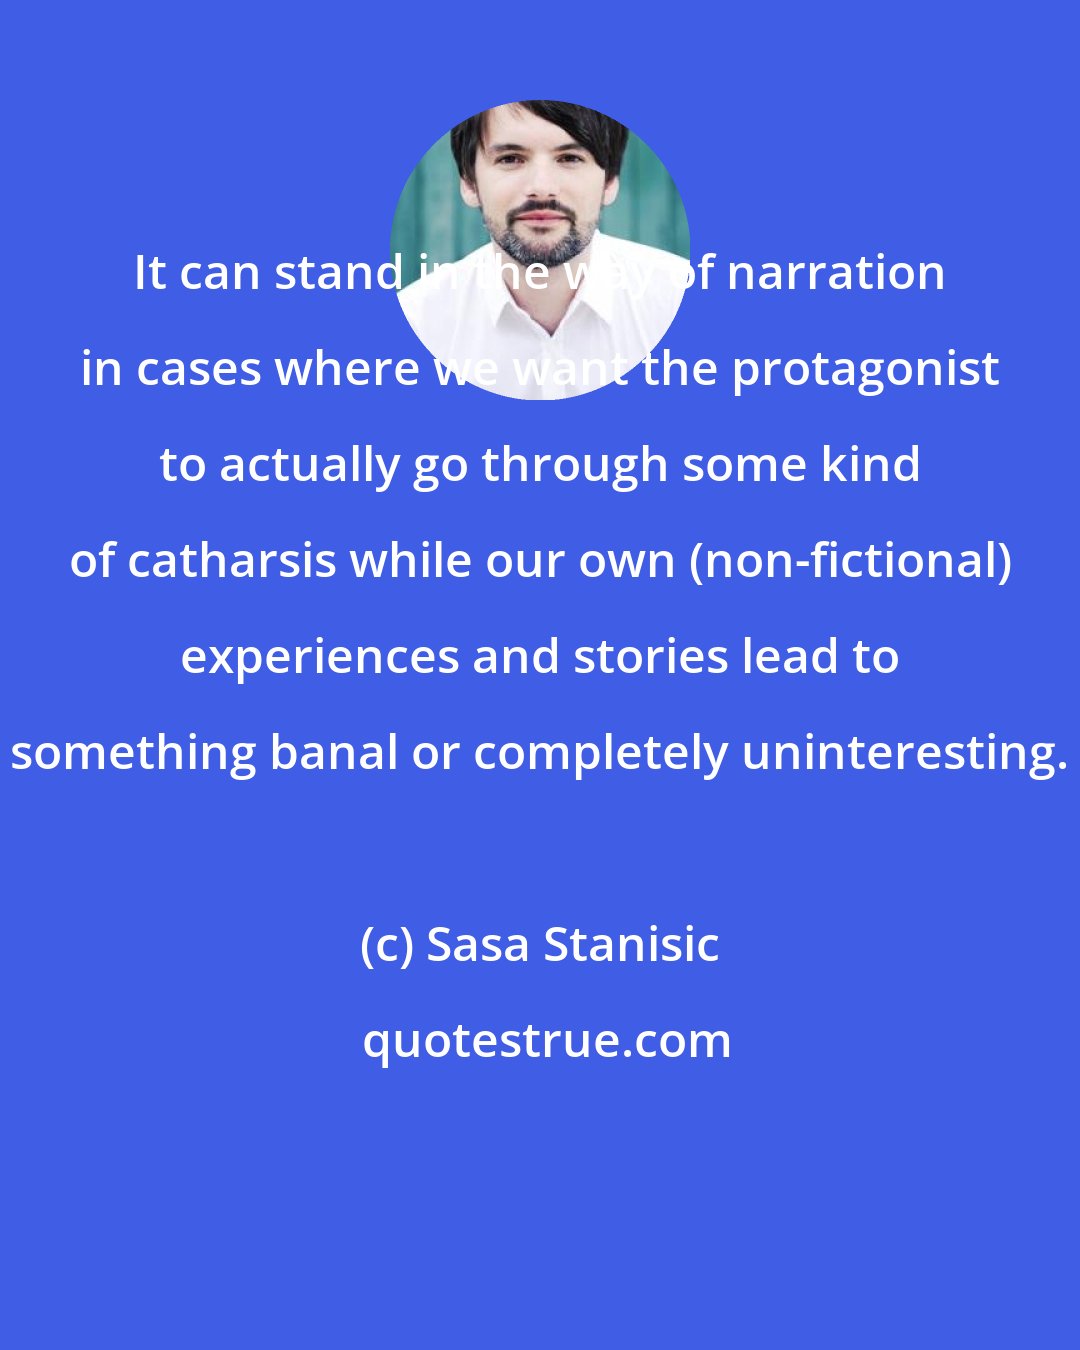 Sasa Stanisic: It can stand in the way of narration in cases where we want the protagonist to actually go through some kind of catharsis while our own (non-fictional) experiences and stories lead to something banal or completely uninteresting.